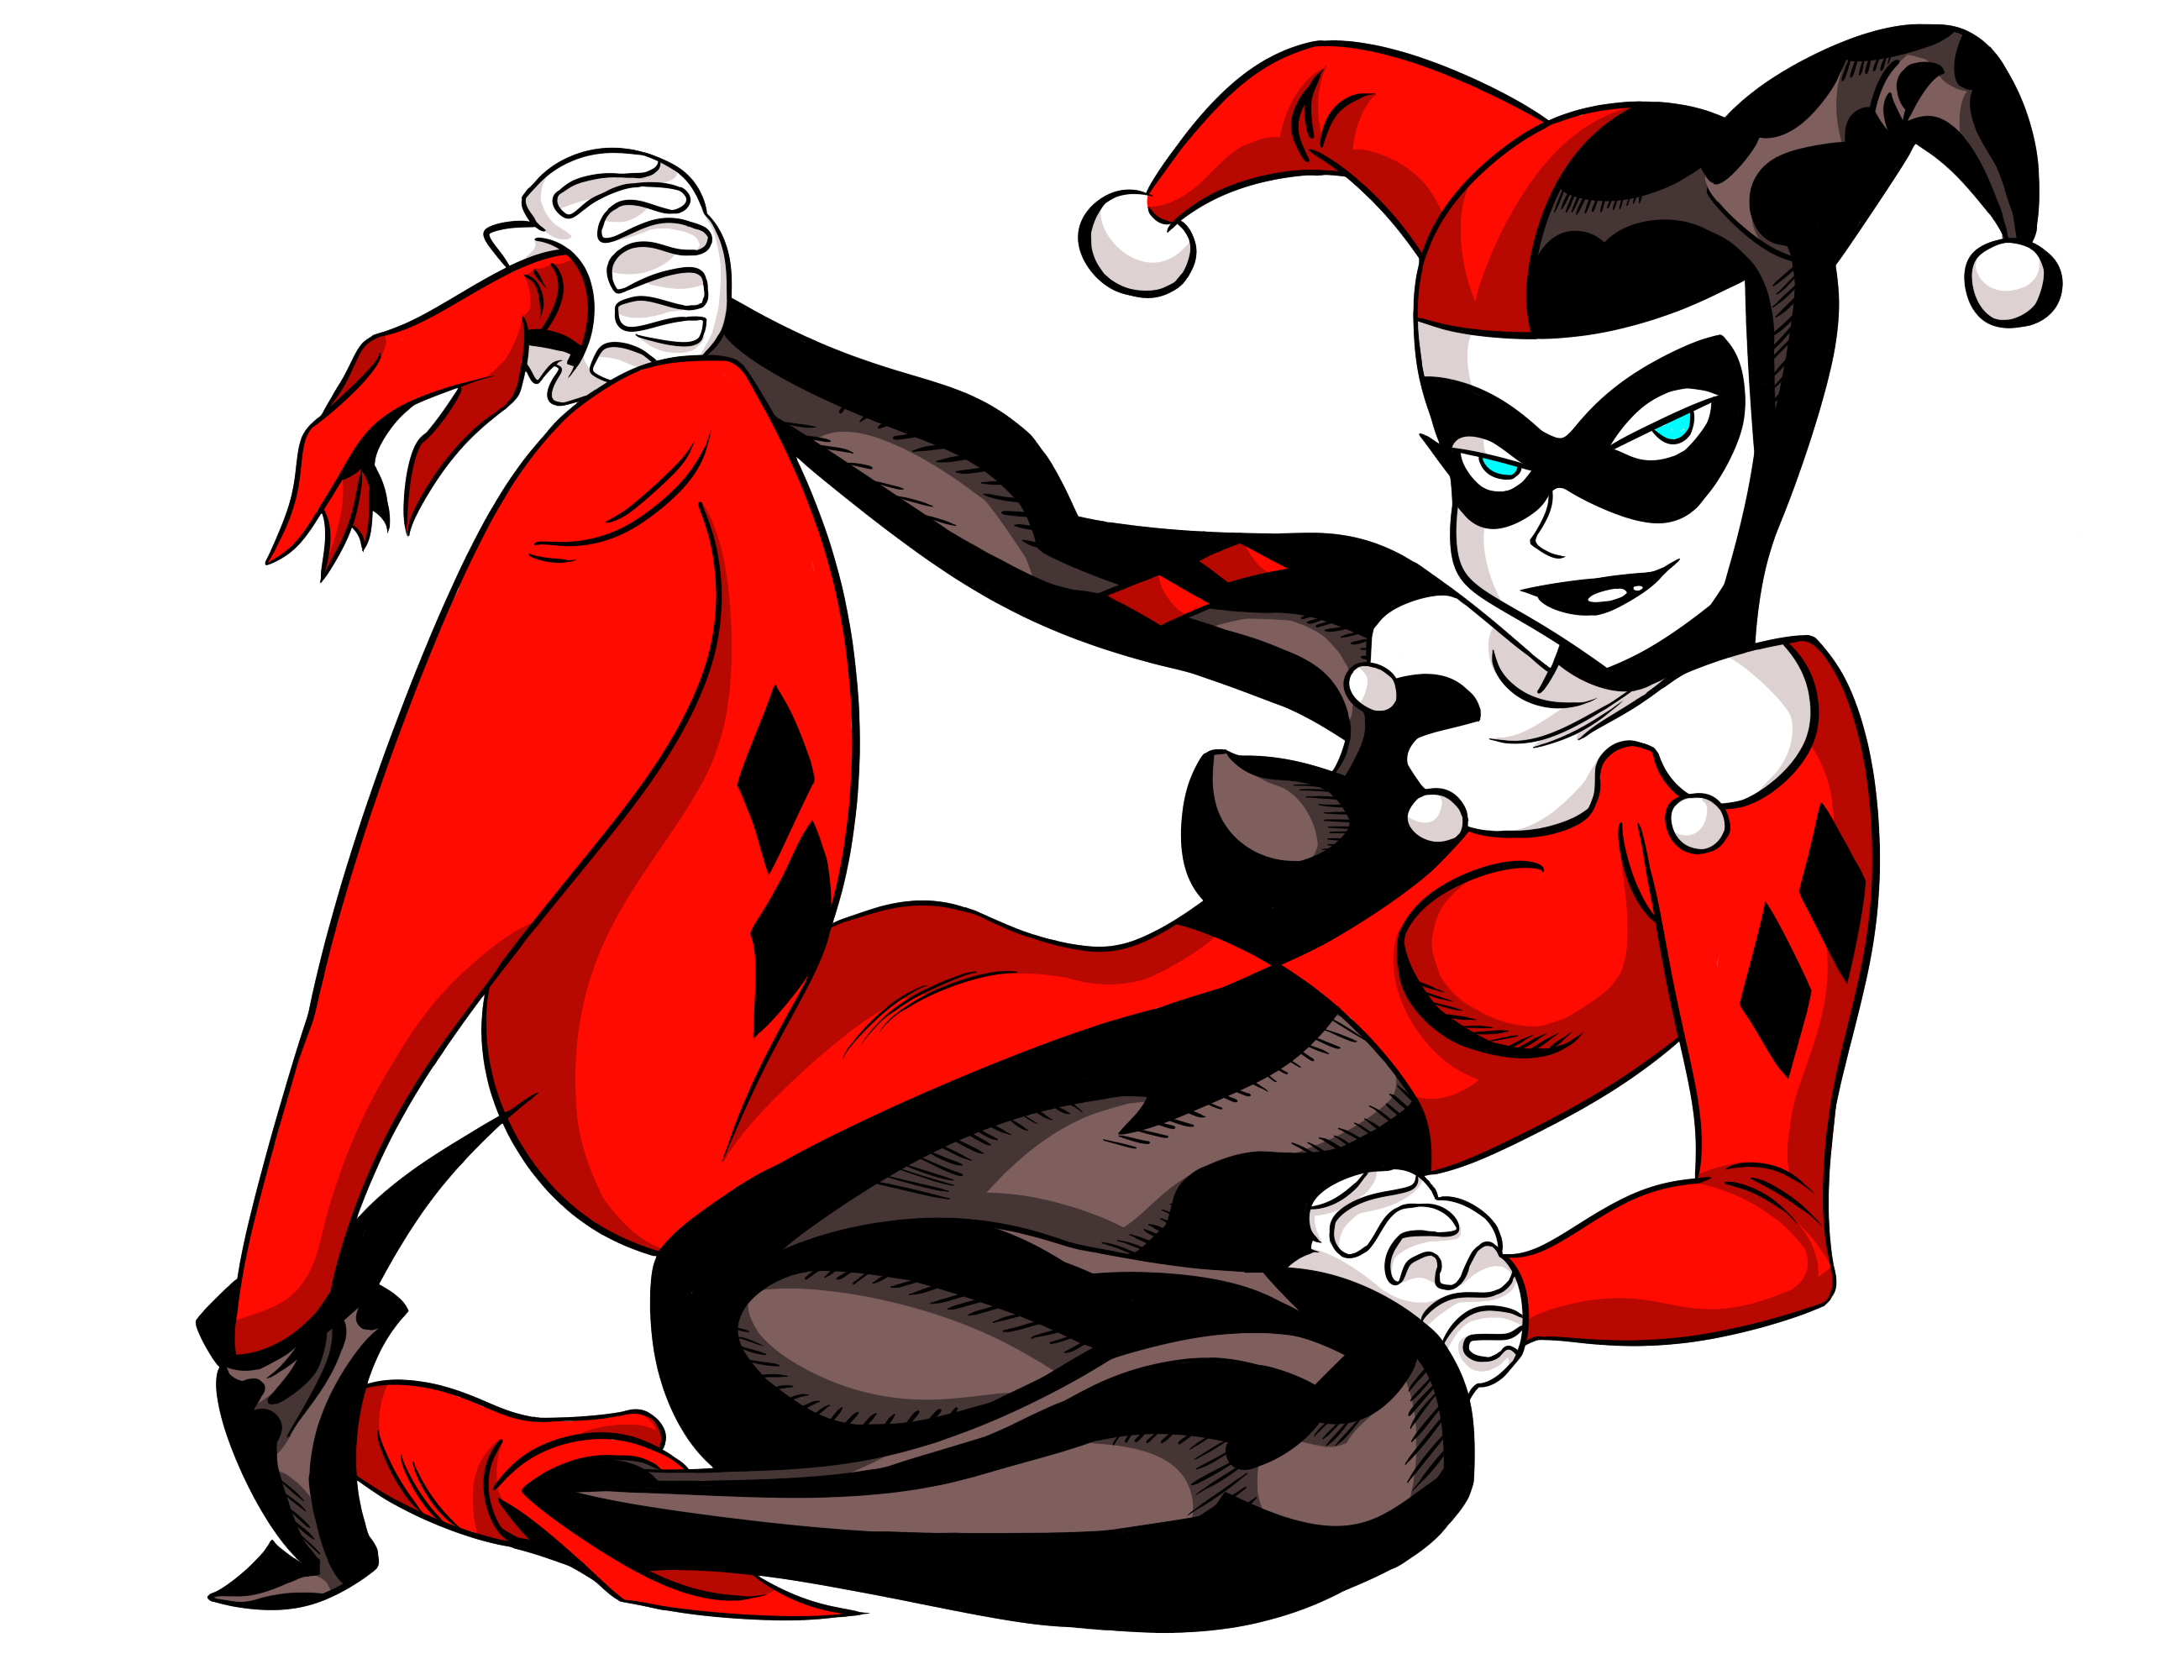 Clip Arts Related To : harley quinn comic png. view all Harley Quinn PNG Tr...